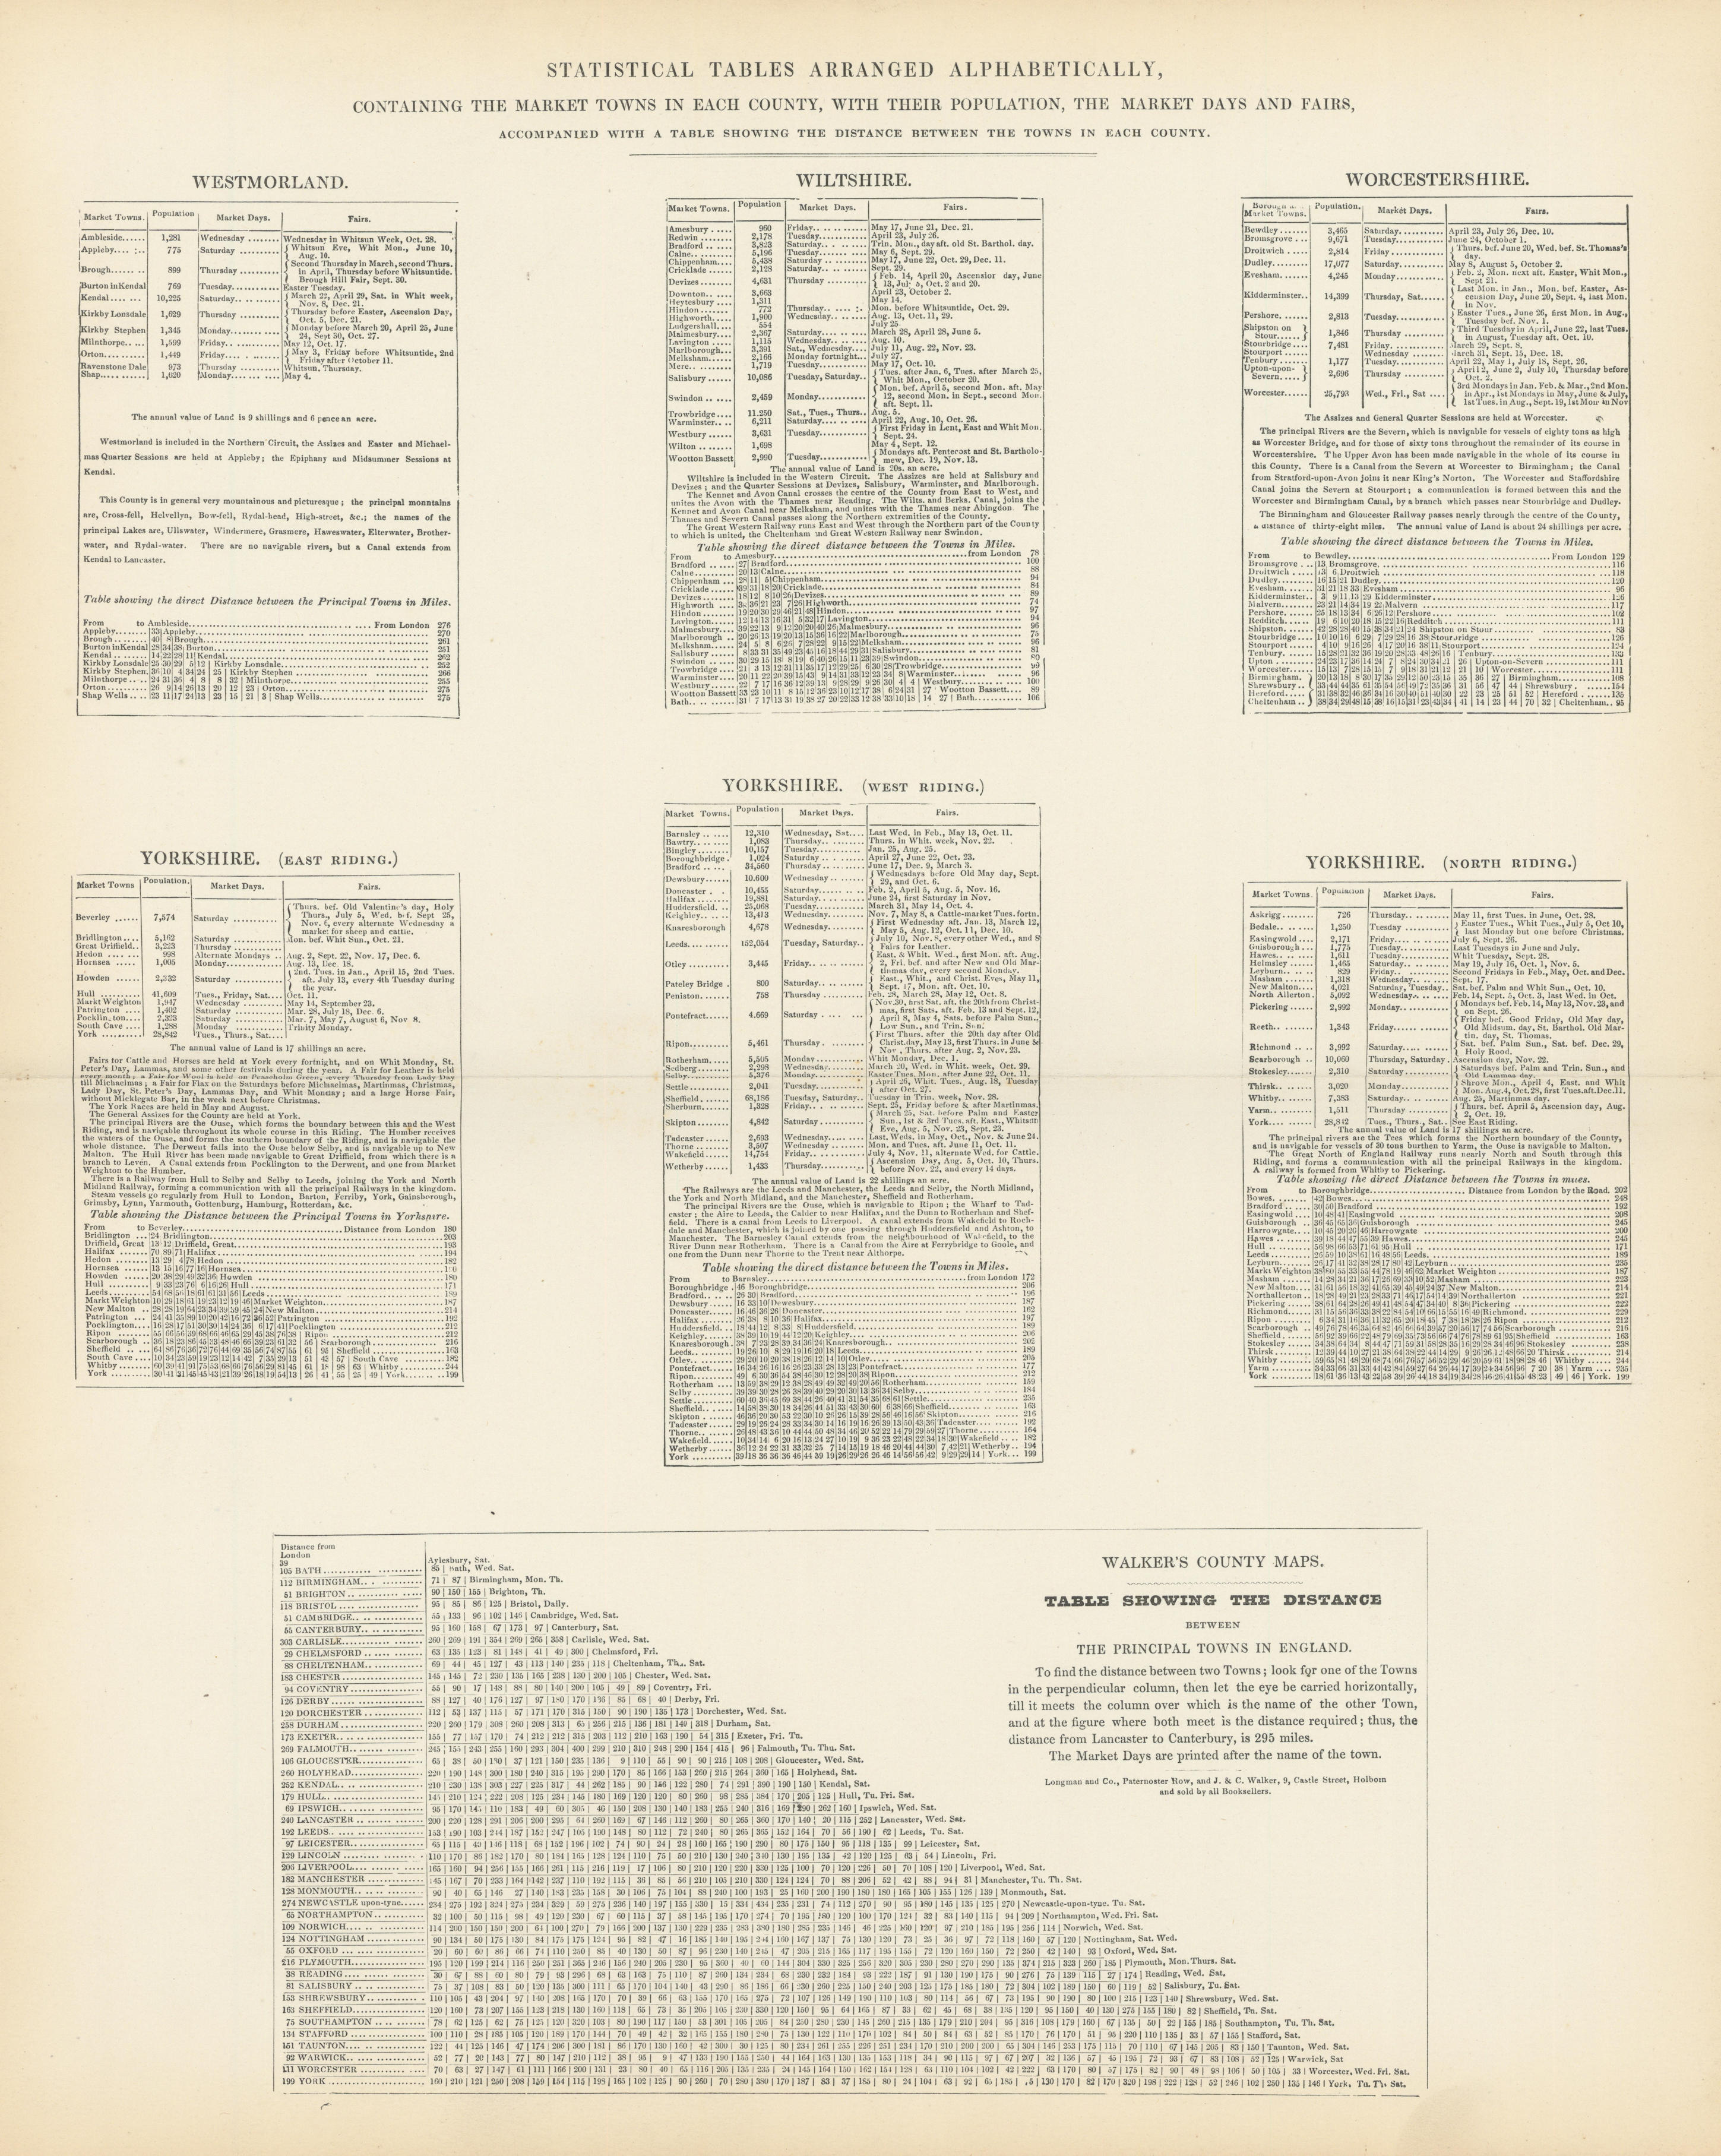 Associate Product Market Towns, days, fairs & population by county. Westmorland-Yorkshire 1870